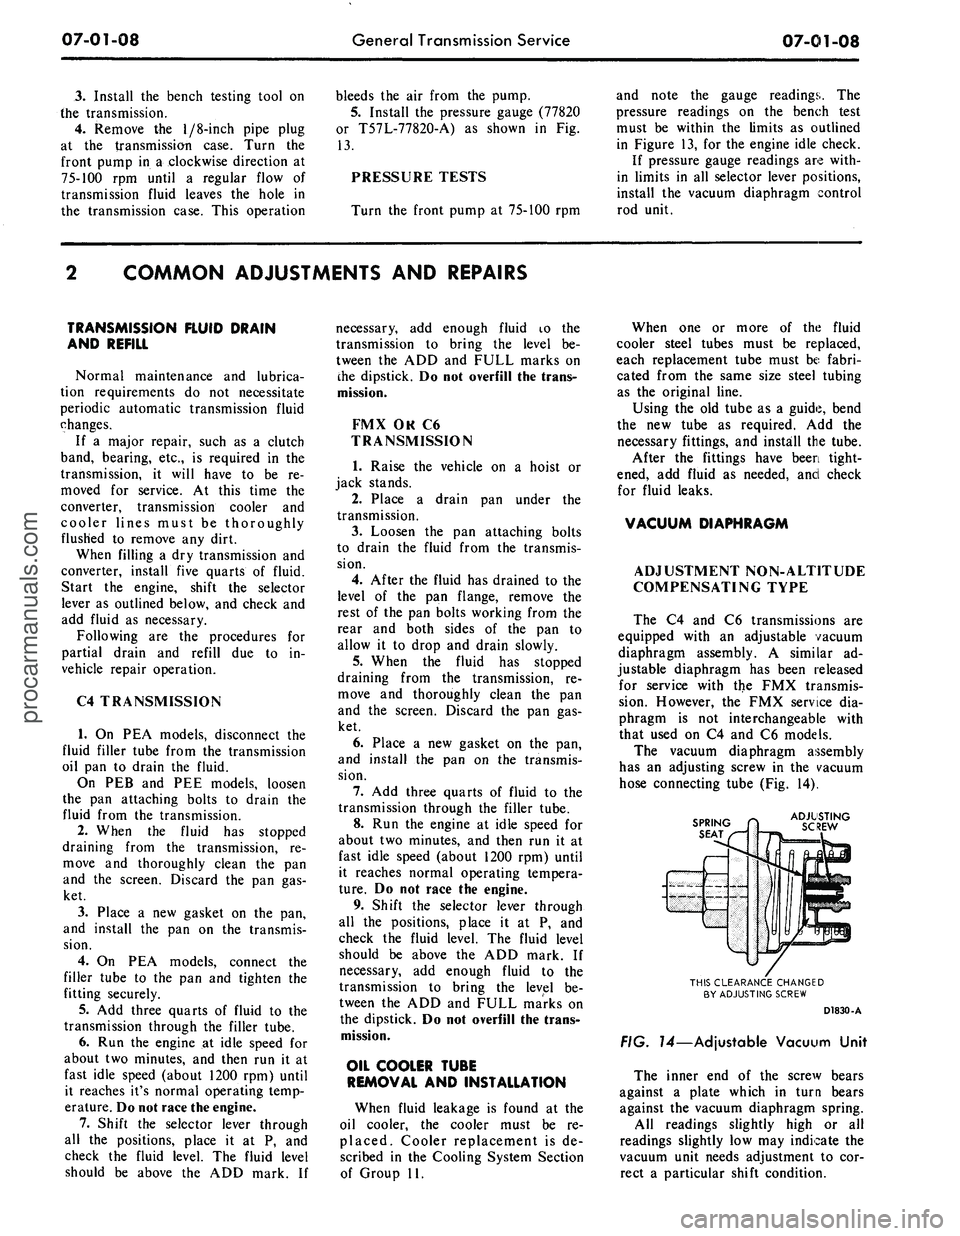 FORD MUSTANG 1969  Volume One Chassis 
07-01-08 
General Transmission Service

07-01-08

3.
 Install the bench testing tool on

the transmission.

4.
 Remove the
 1/8-inch
 pipe plug

at the transmission case. Turn the

front pump in a cl